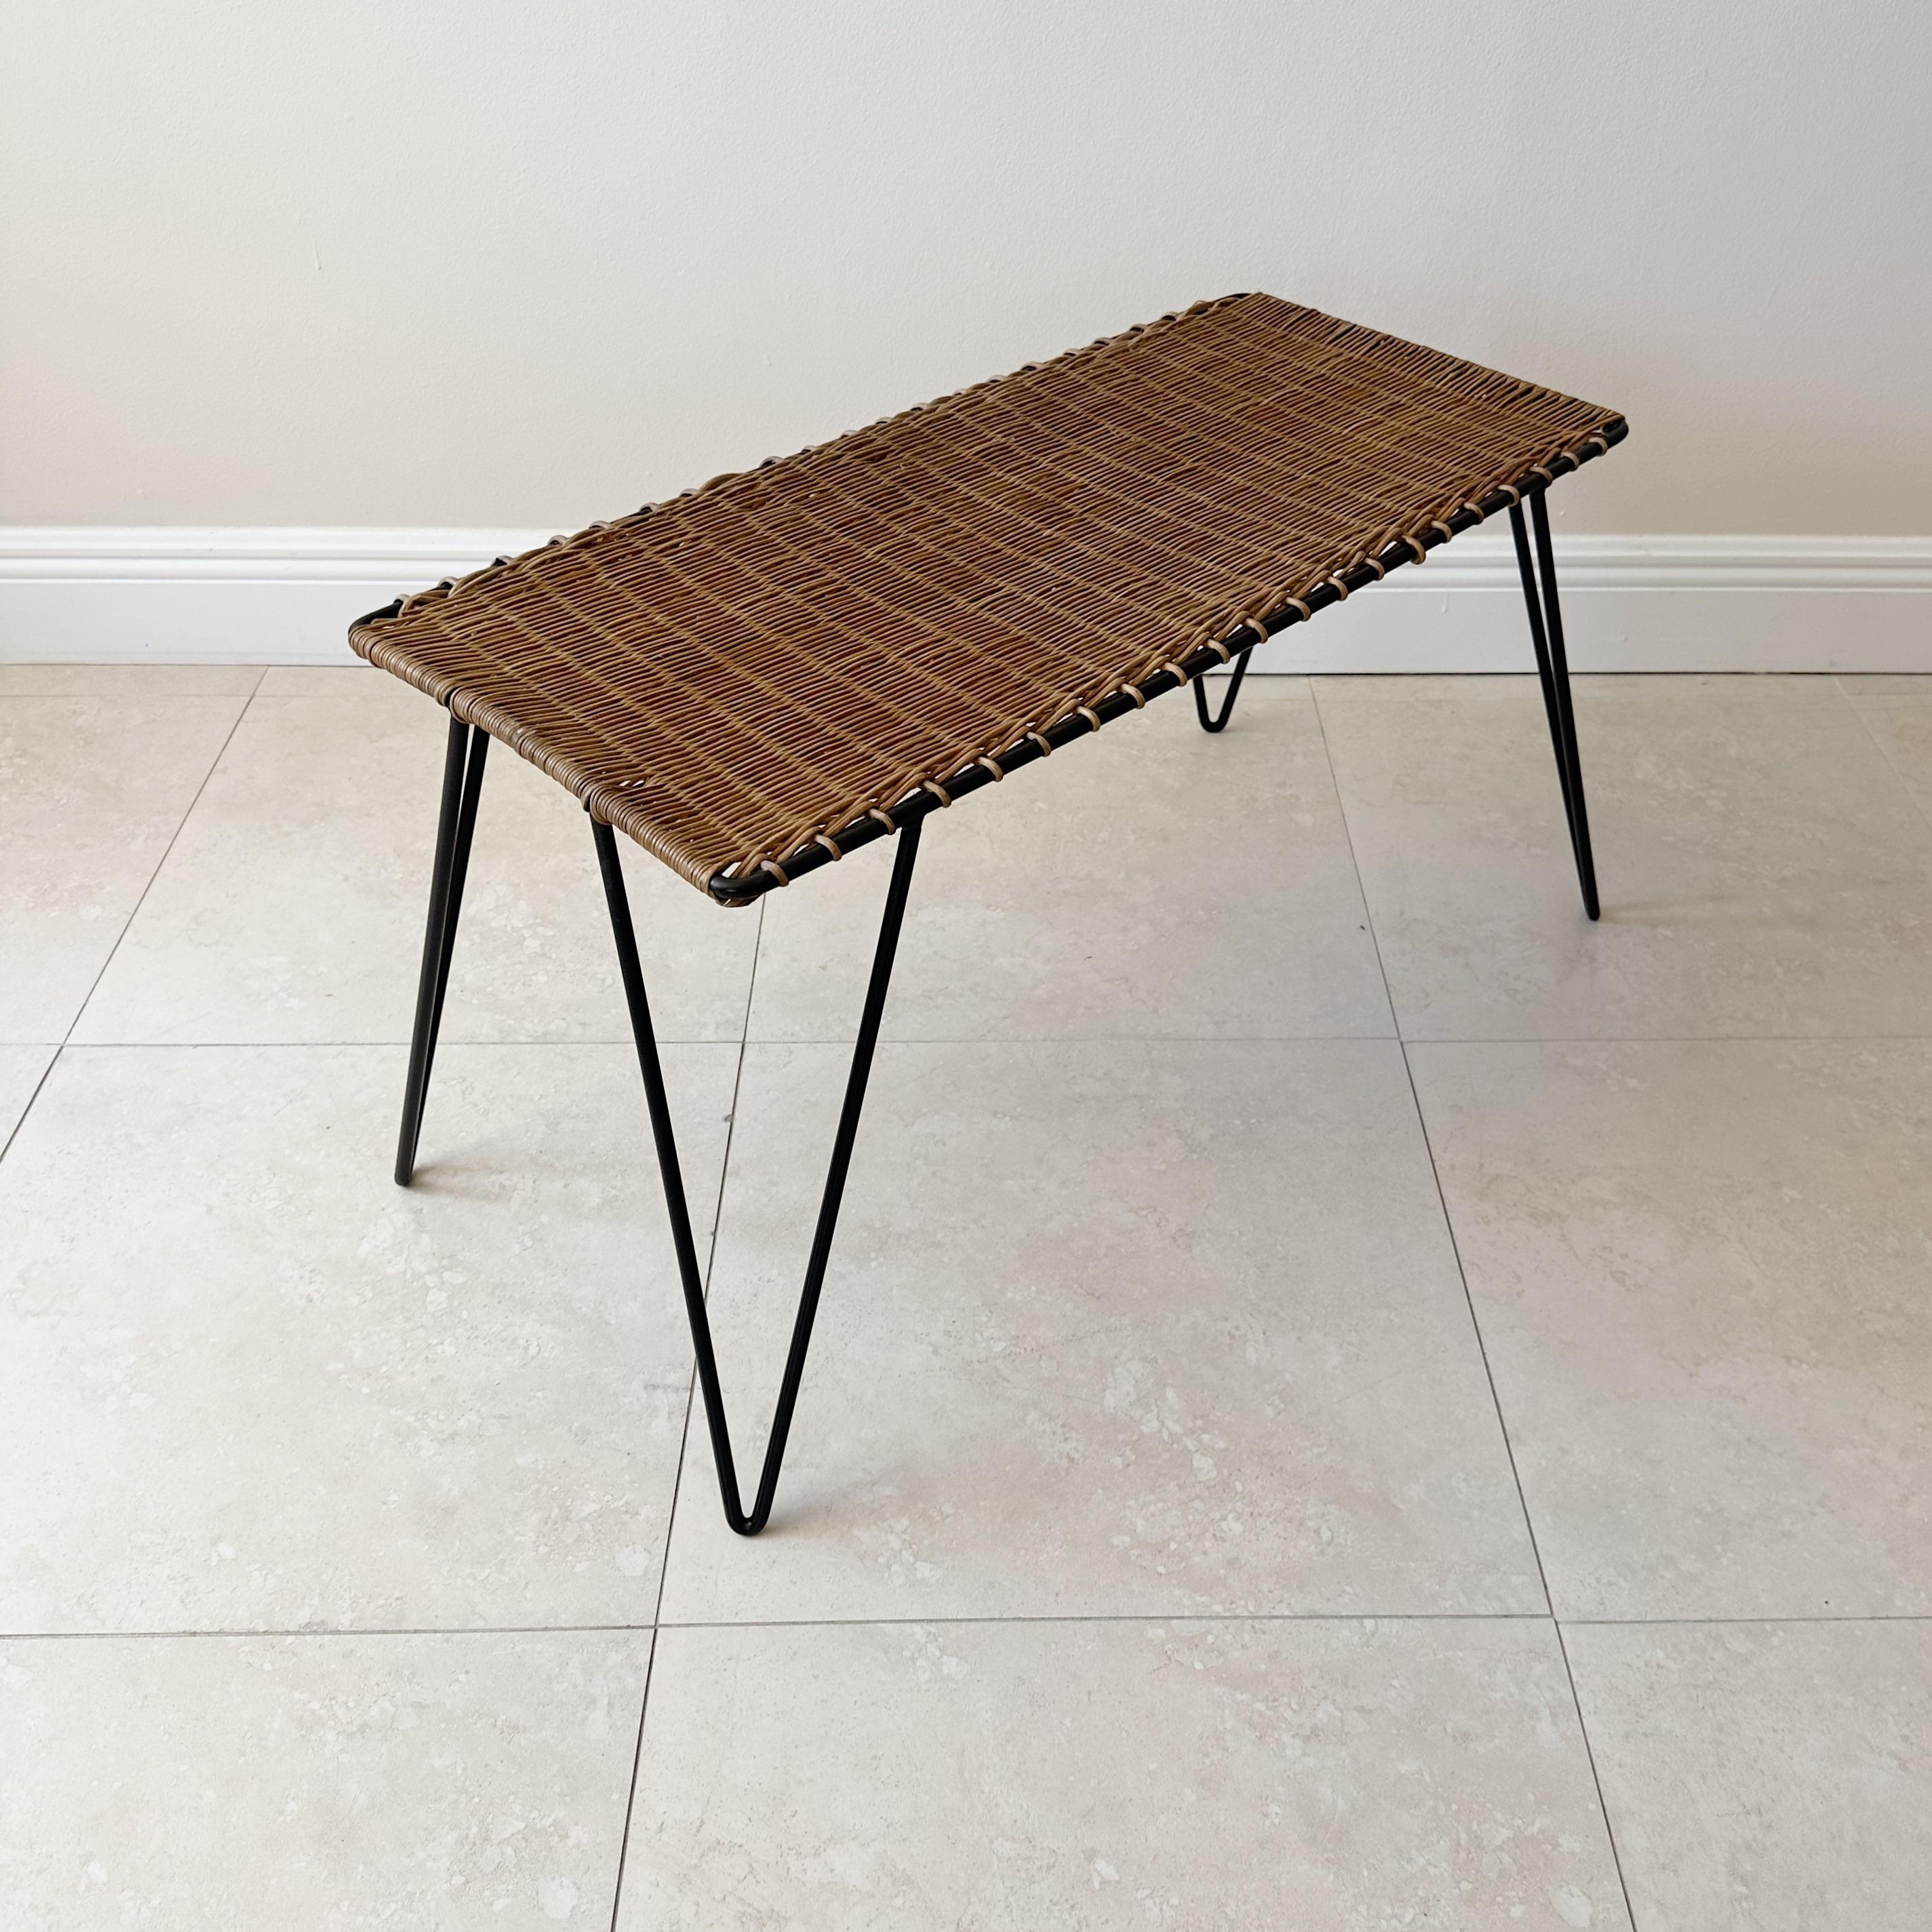 Wicker and painted black iron coffee table by French designer Raoul Guys.
Crafted in France in the 1960's with a charming blend of braided rattan and iron.
Original black paint in excellent vintage condition, with minor signs of wear that enhance